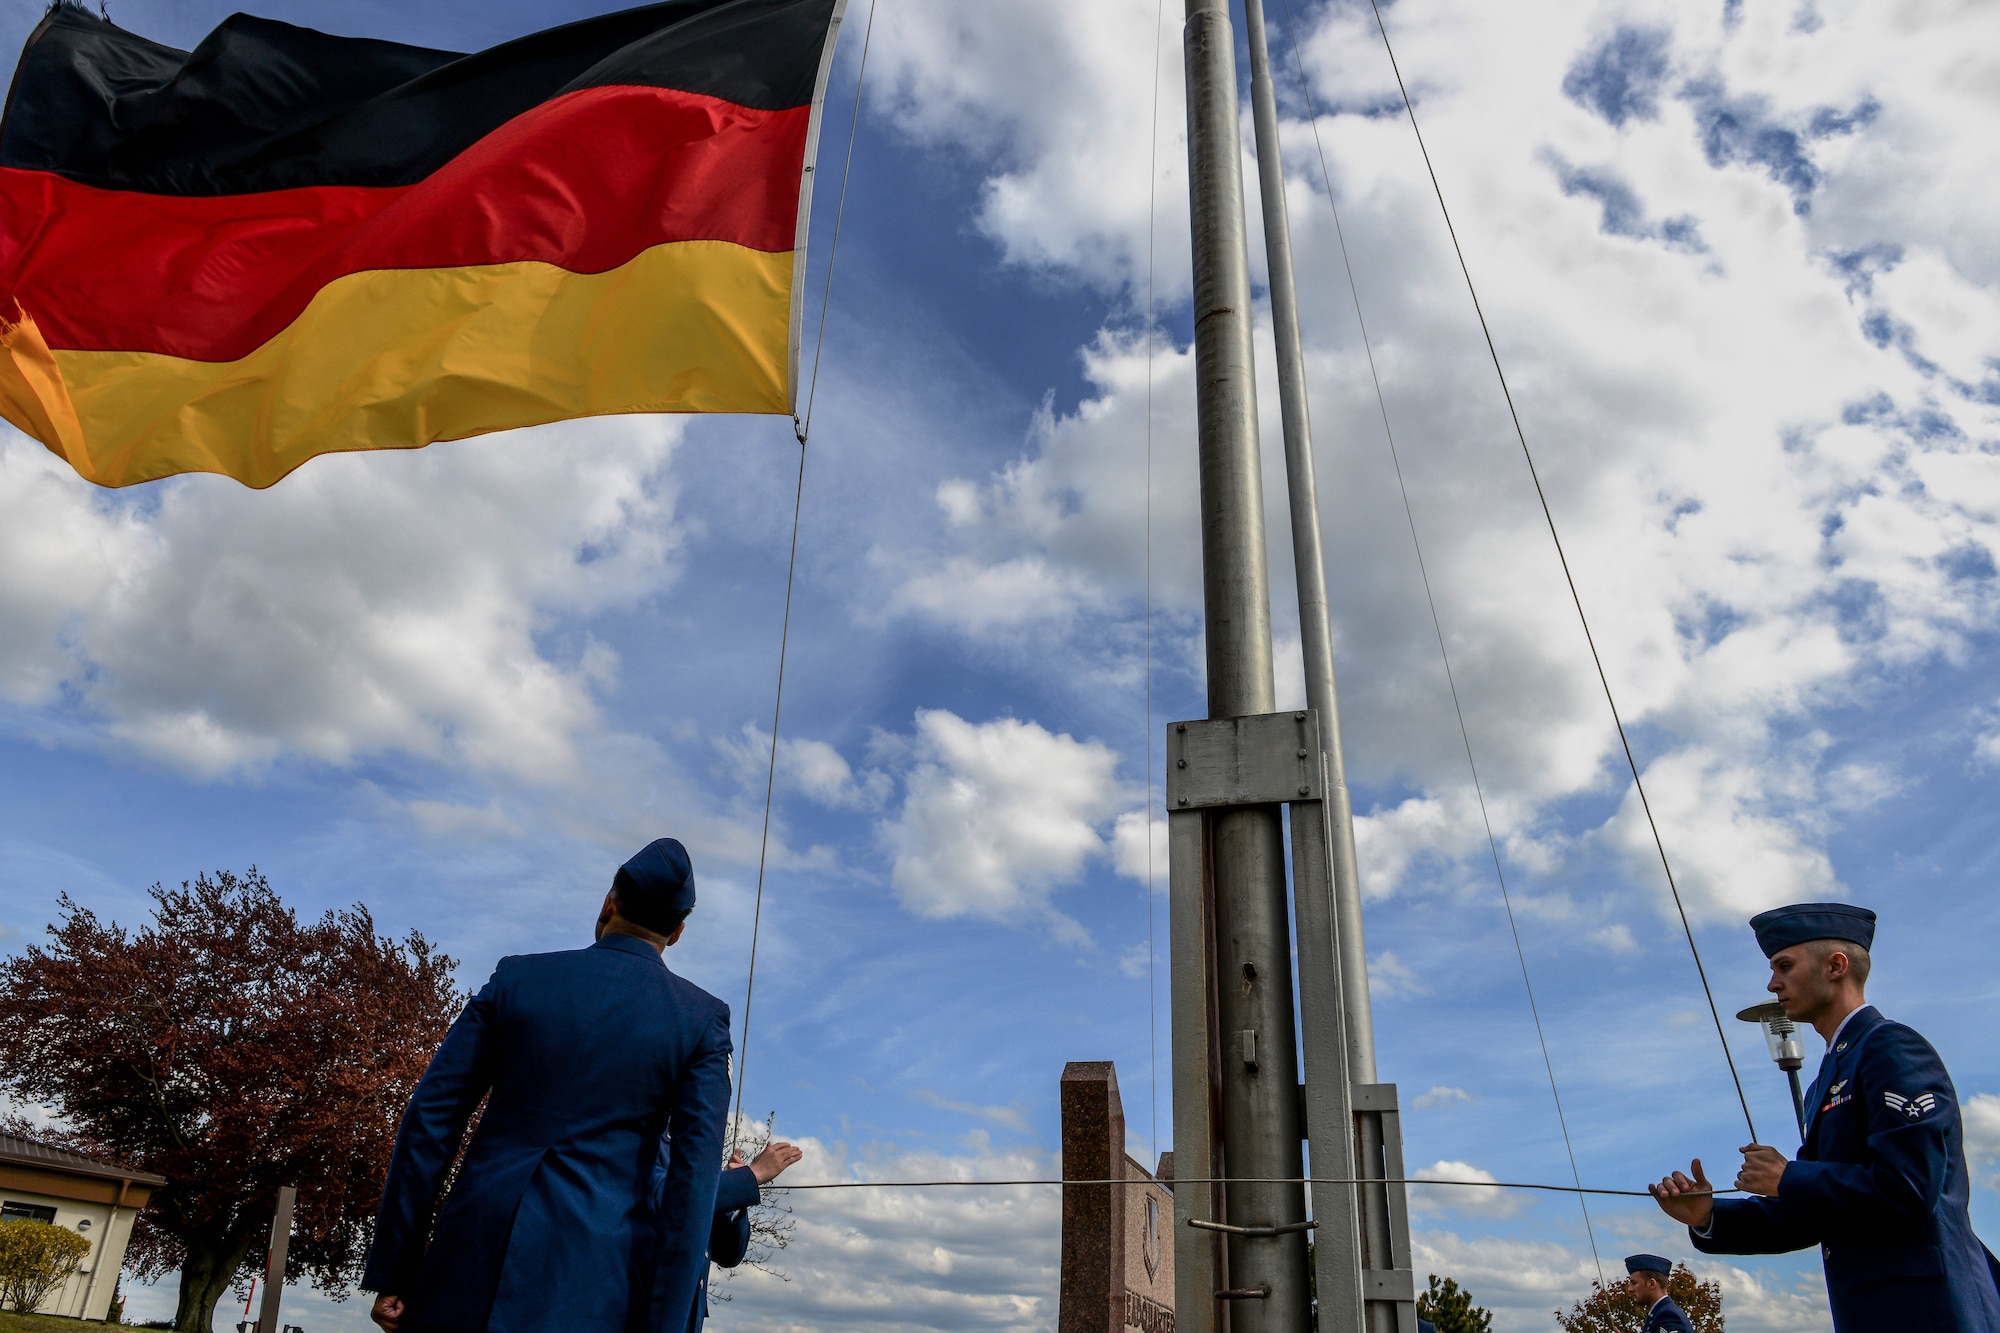 Airmen from the 86th Operations Group lower the German flag during a retreat and remembrance ceremony April 29, 2016, at Ramstein Air Base, Germany.  Airmen from the 86th OG gathered for the ceremony to recognize the Implementation Force 21 crew from the 76th Airlift Squadron who gave the ultimate sacrifice 20 years ago when their aircraft was lost during an approach into Dubrovnik, Croatia. (U.S. Air Force photo/Senior Airman Nicole Keim)